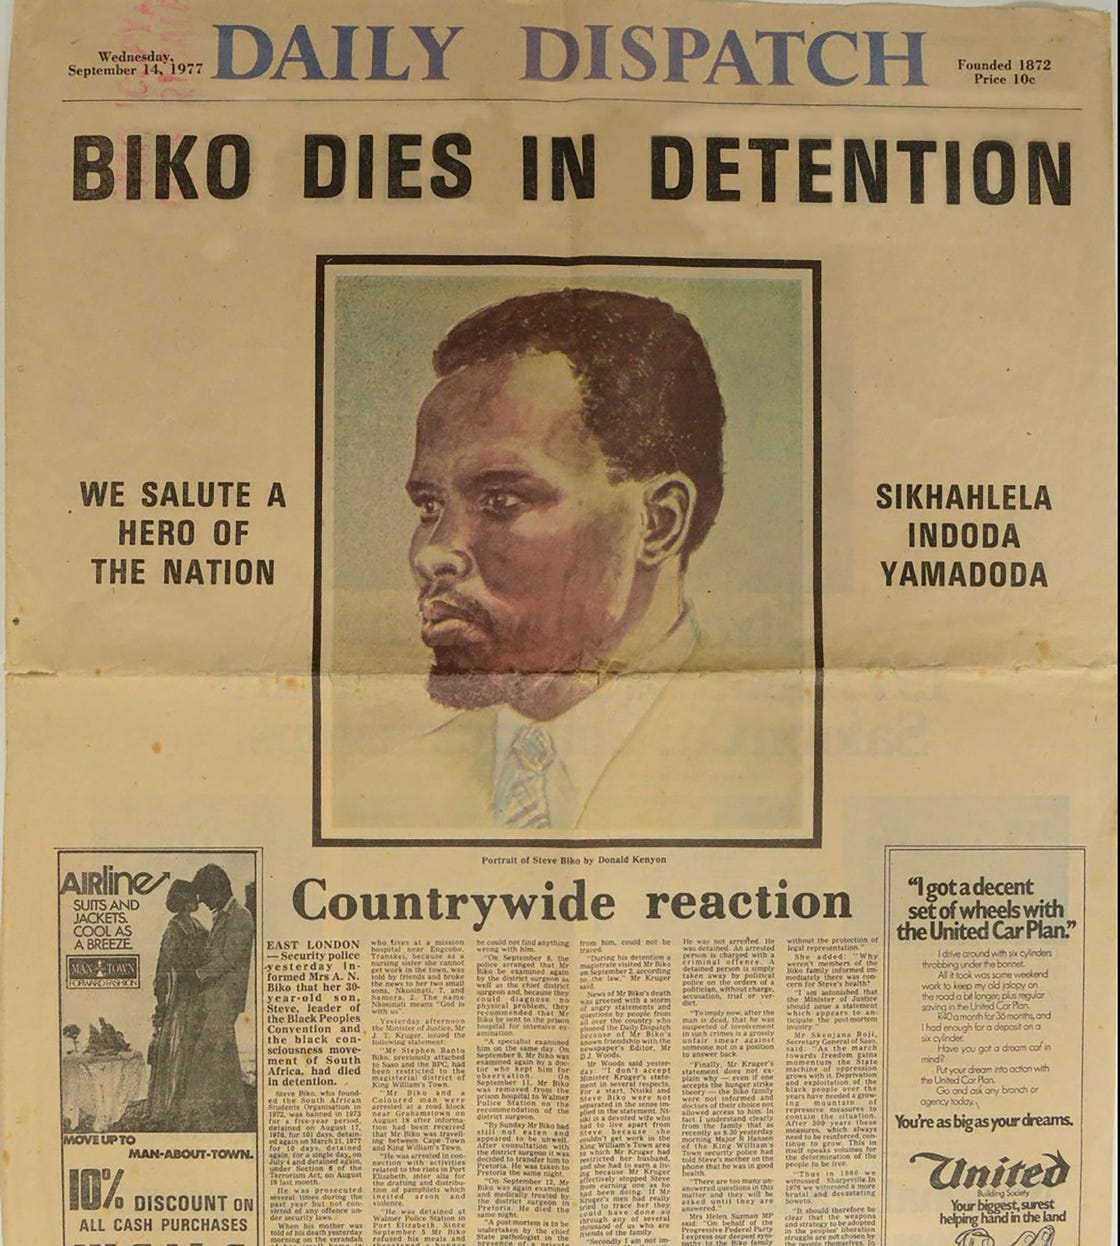 Dramatic front page lament forever lays blame of Biko's death on regime